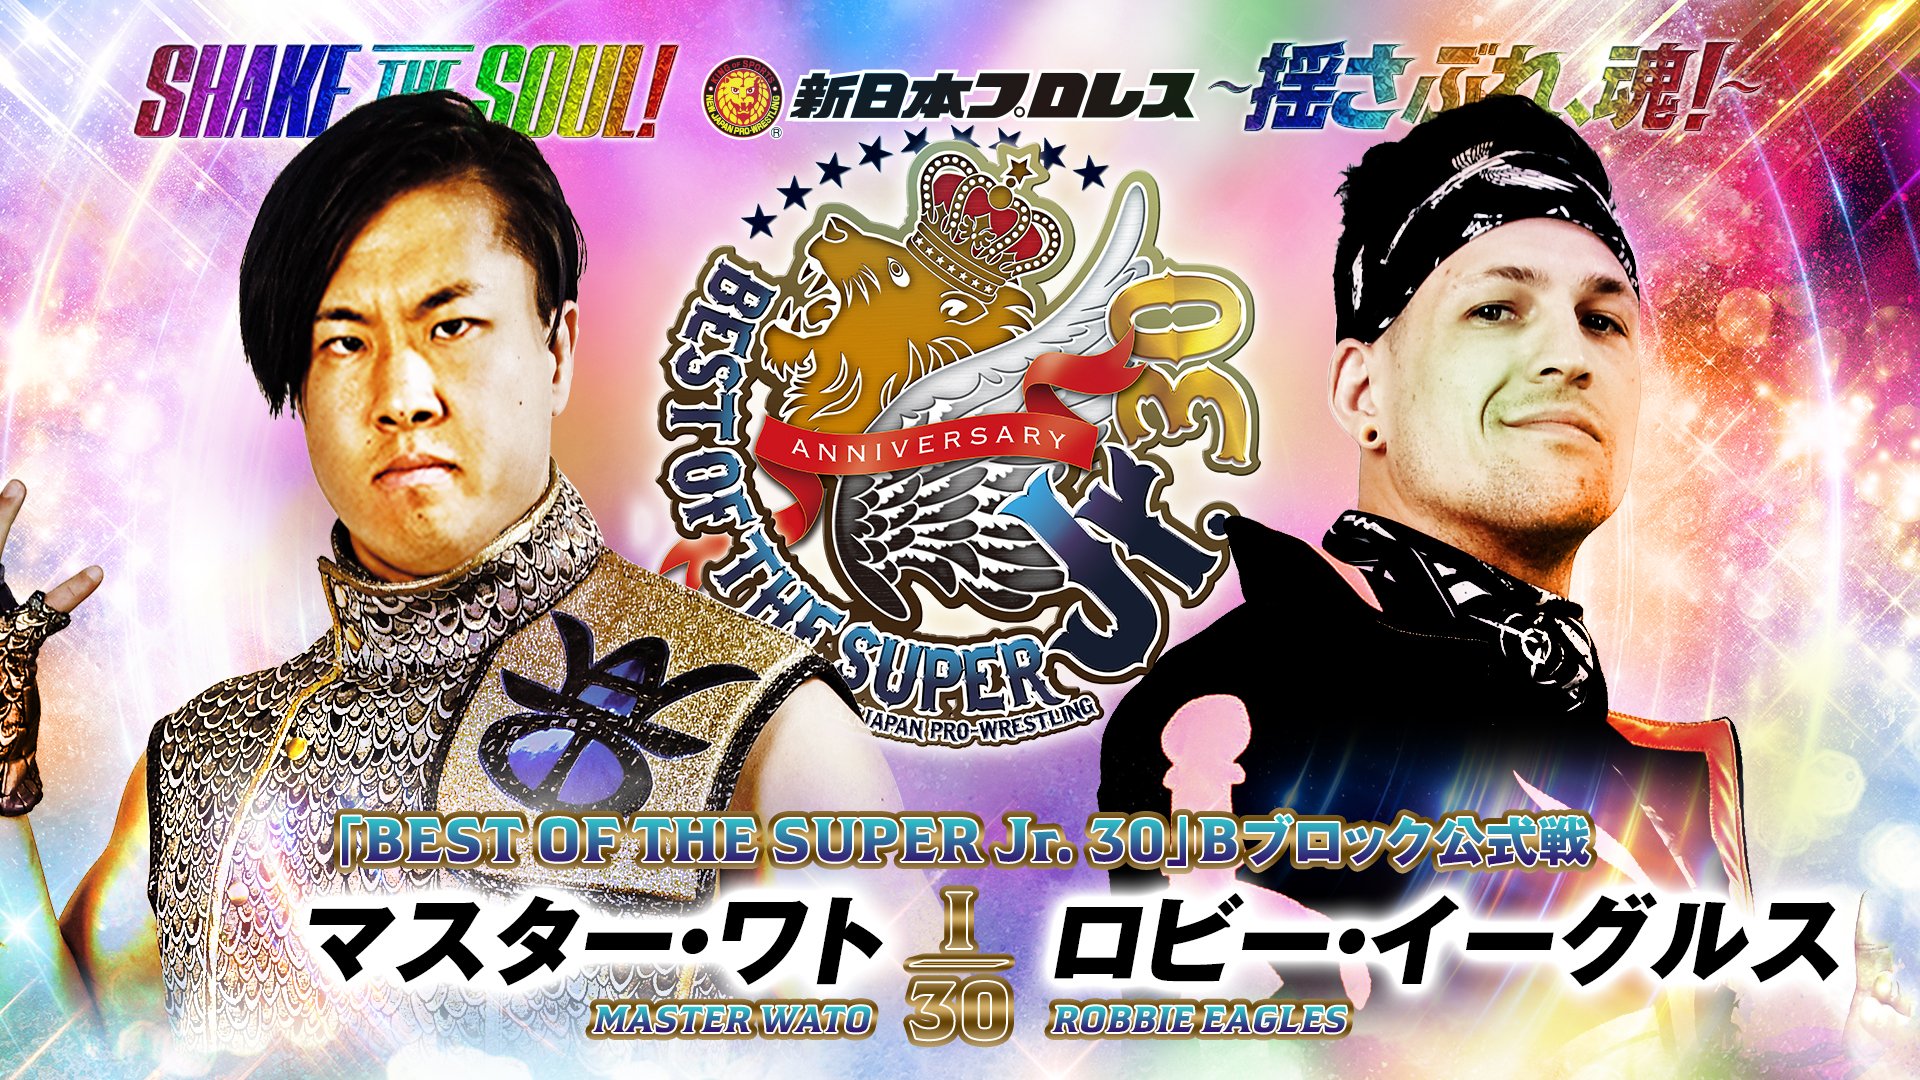 Night Six of the Best Of The Super Jr.30